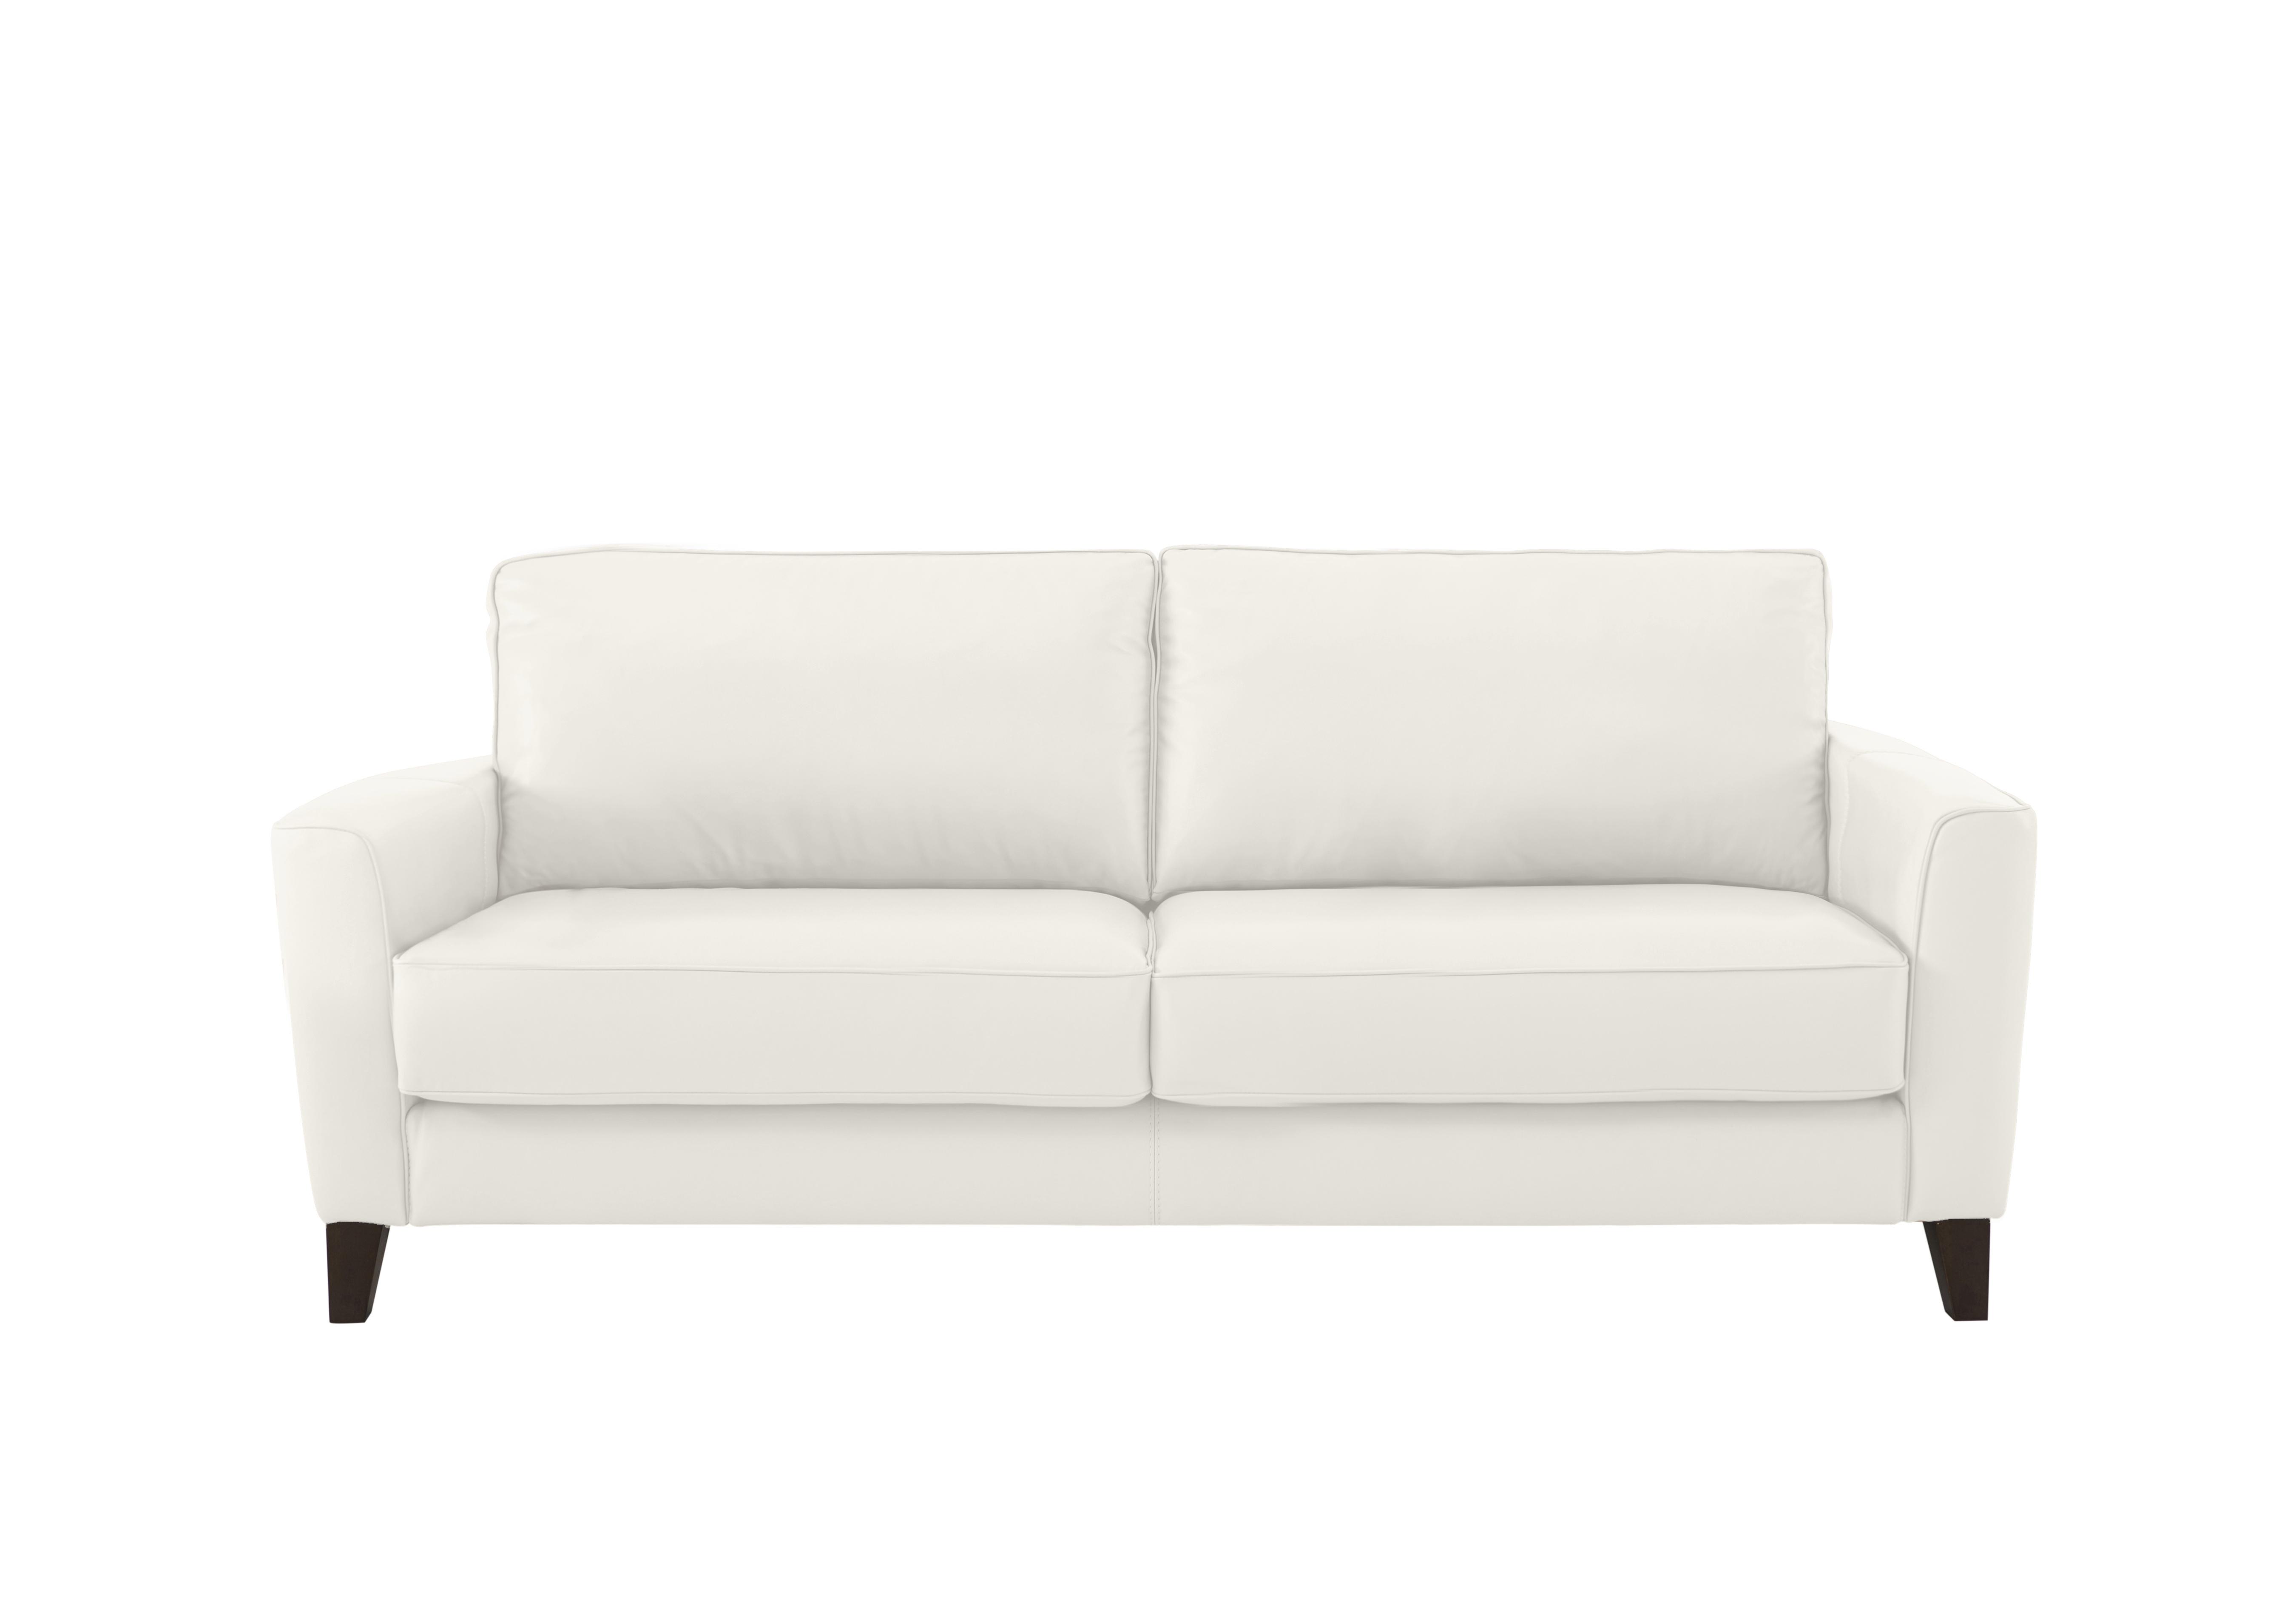 Brondby 3 Seater Leather Sofa in Bv-744d Star White on Furniture Village